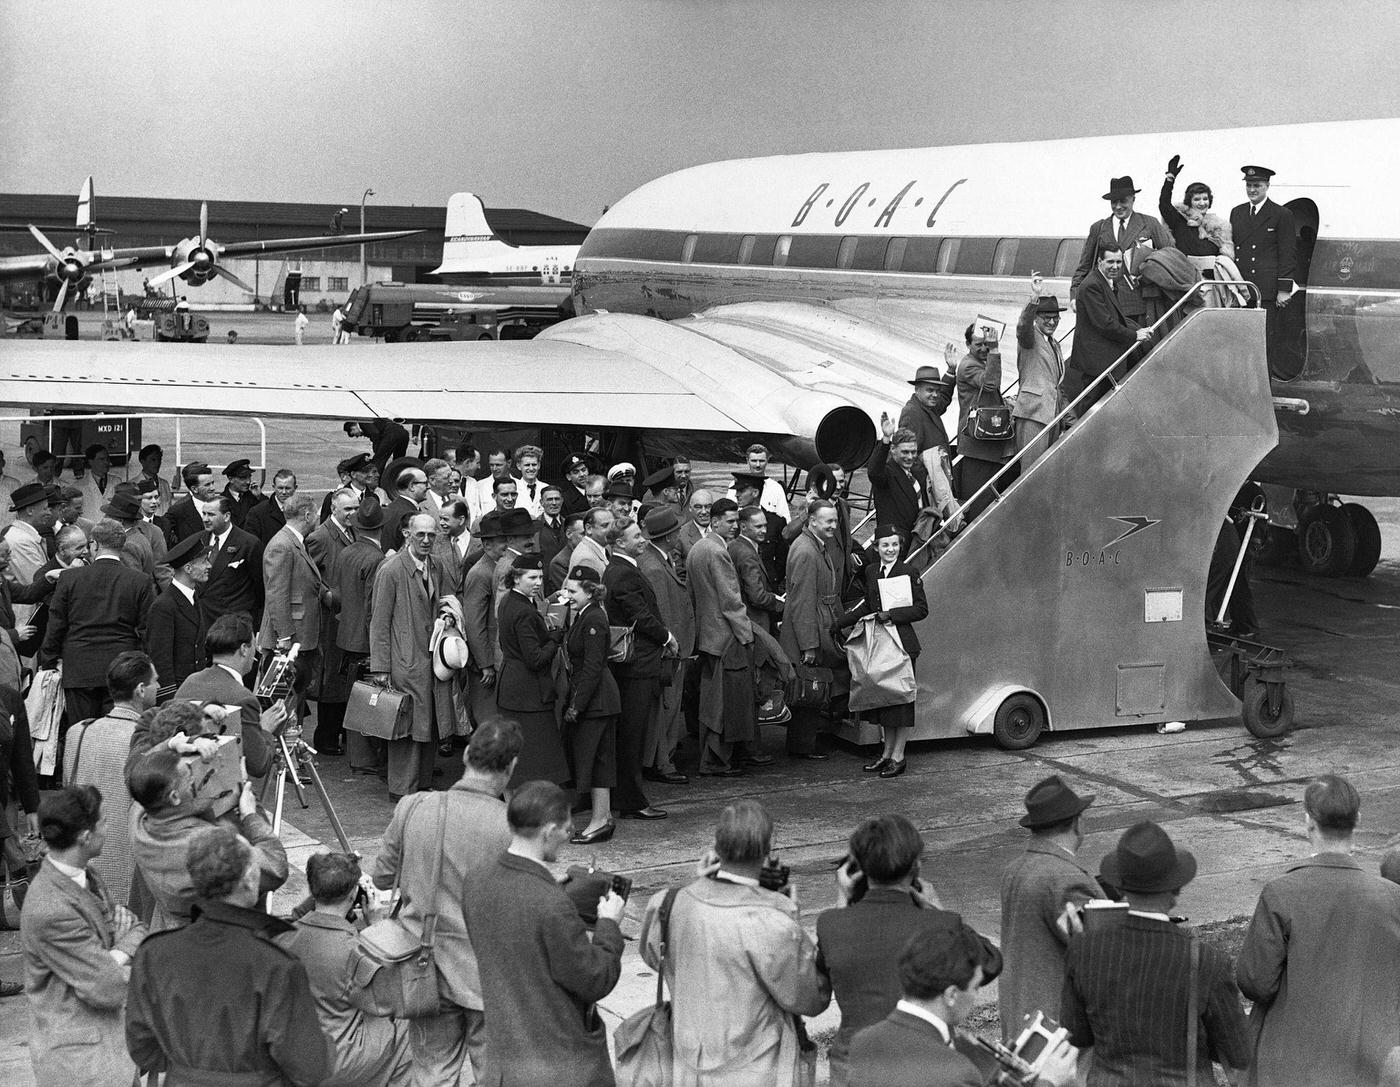 The first passengers of the world's inaugural jet service board their plane bound for Johannesburg, while nearby reporters capture the event.